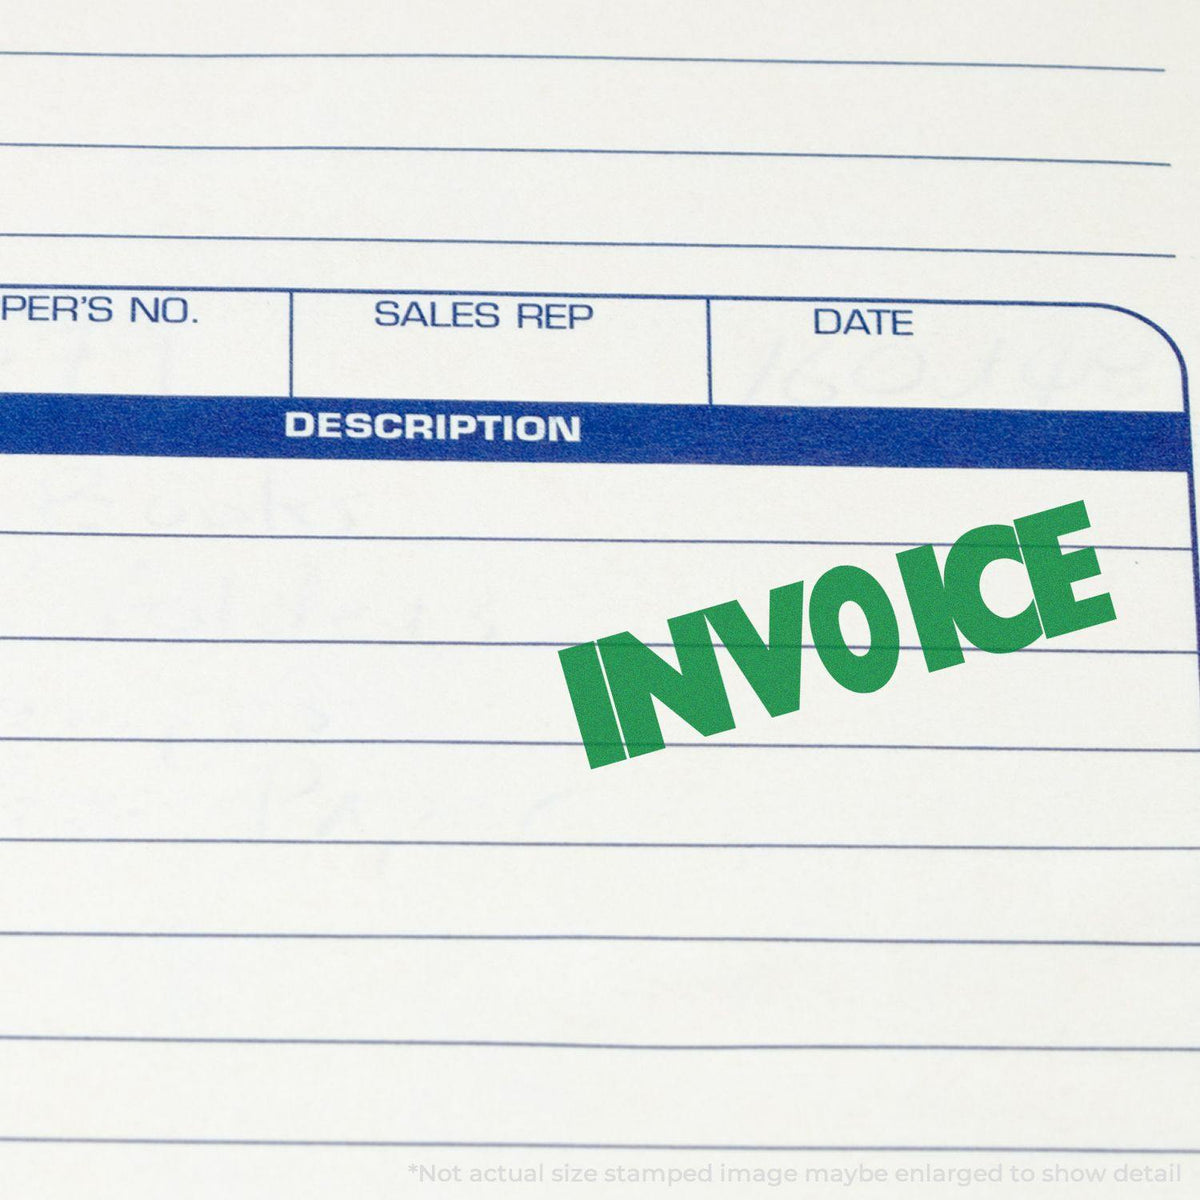 Large Invoice Rubber Stamp In Use Photo